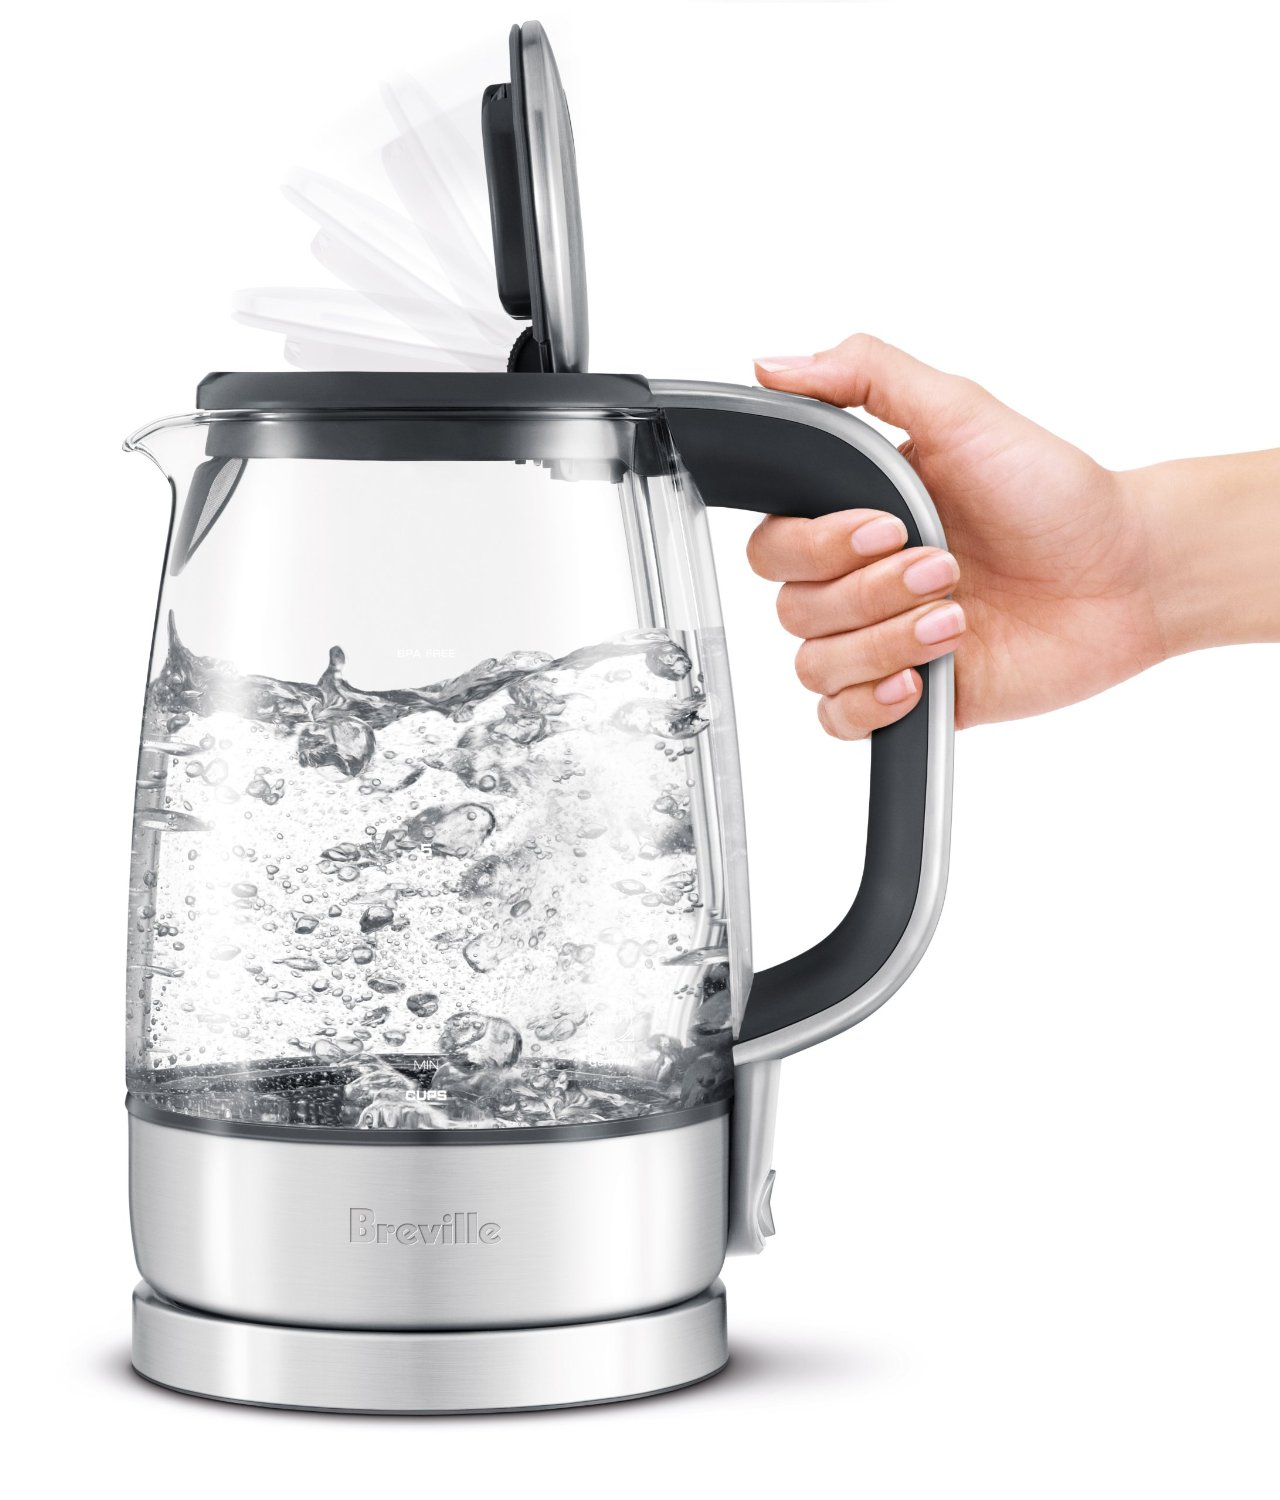 Breville USA BKE595XL The Crystal Clear Electric Kettle Review